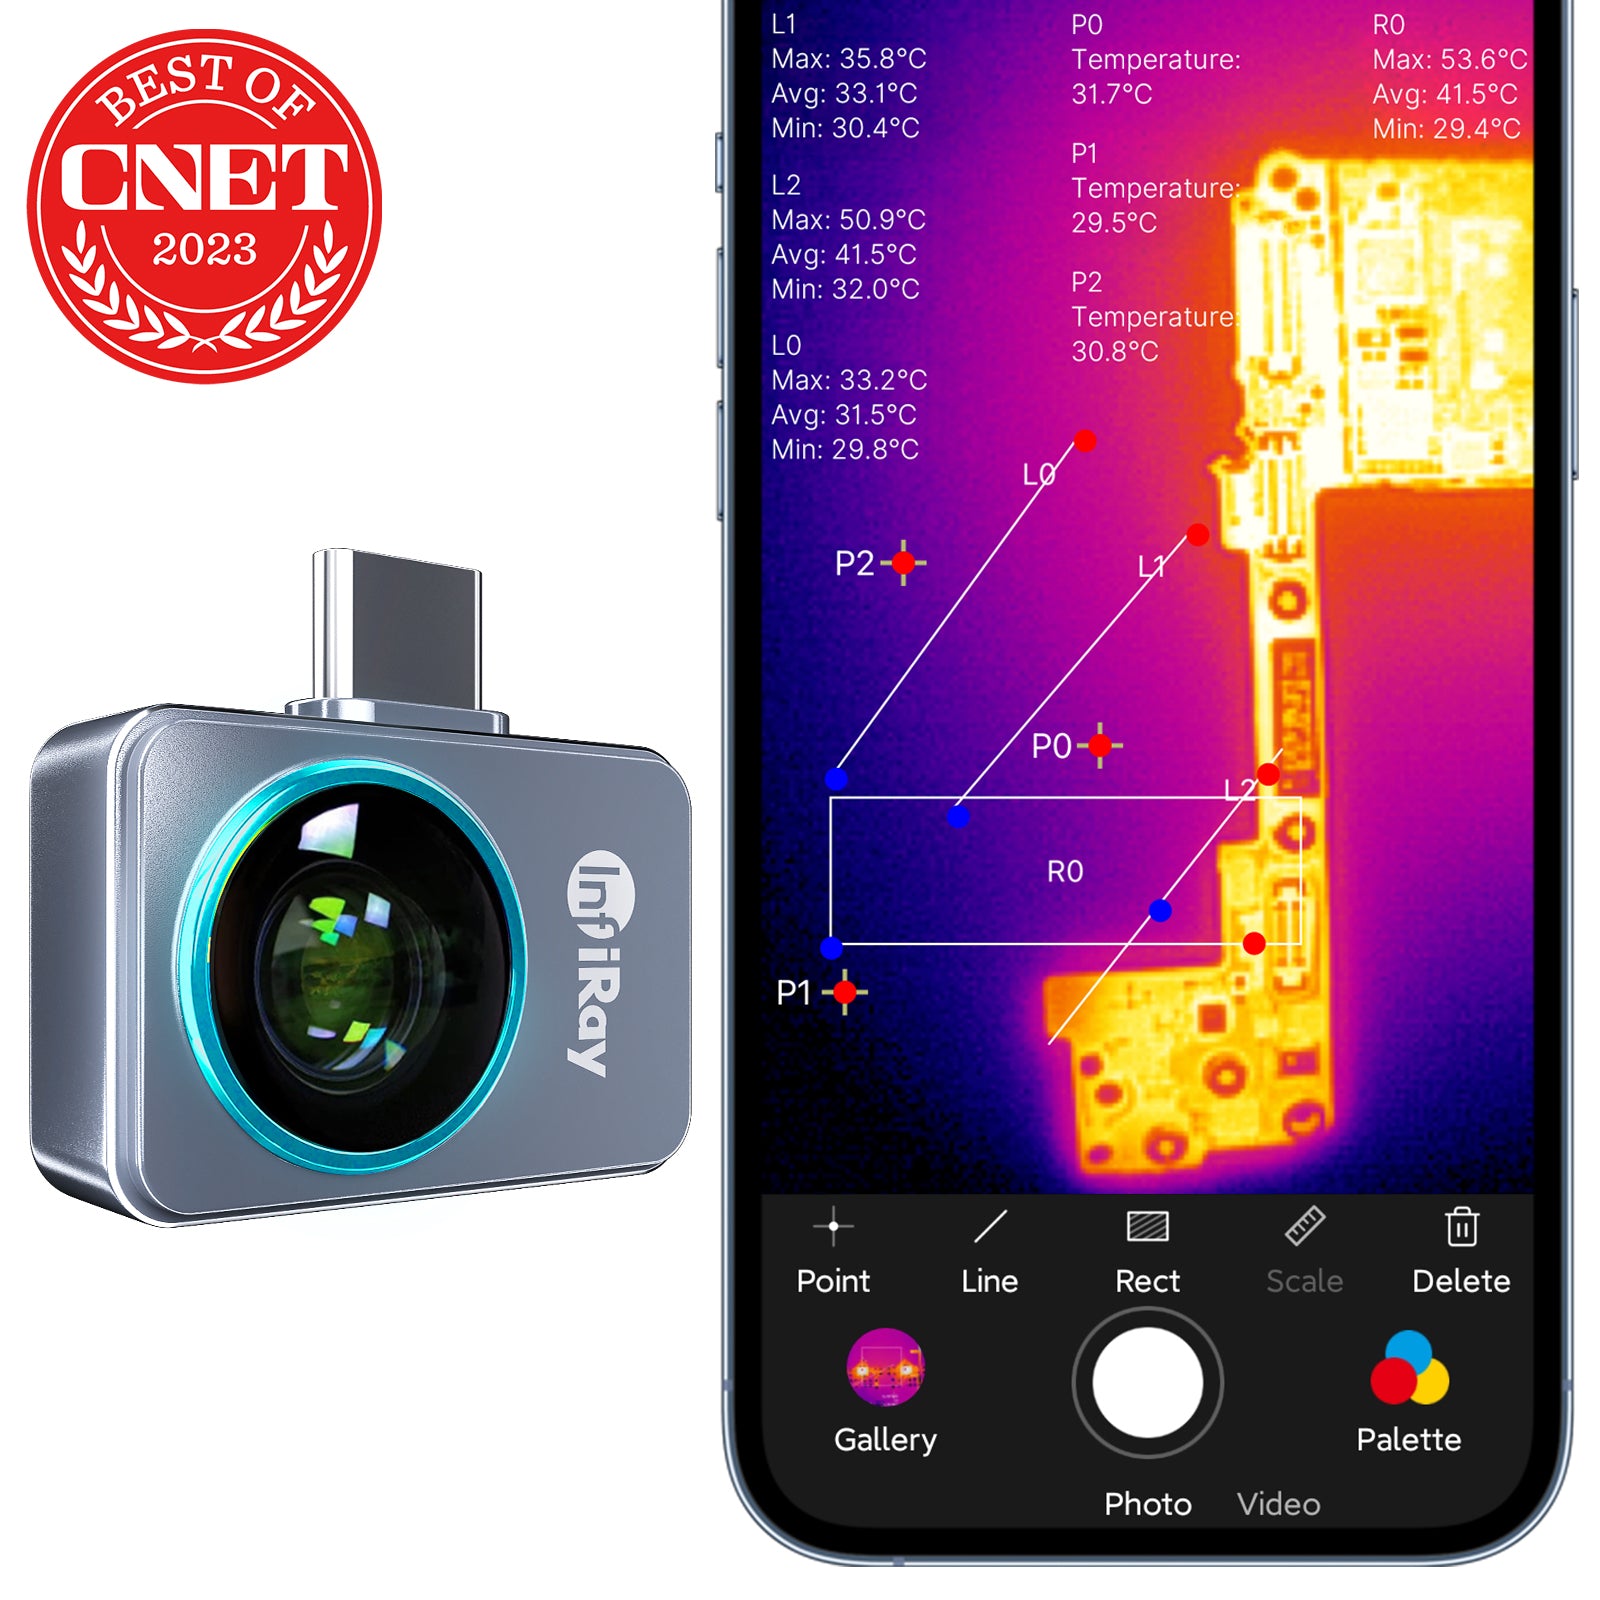 InfiRay P2 Pro Review : Thermal Camera for Android